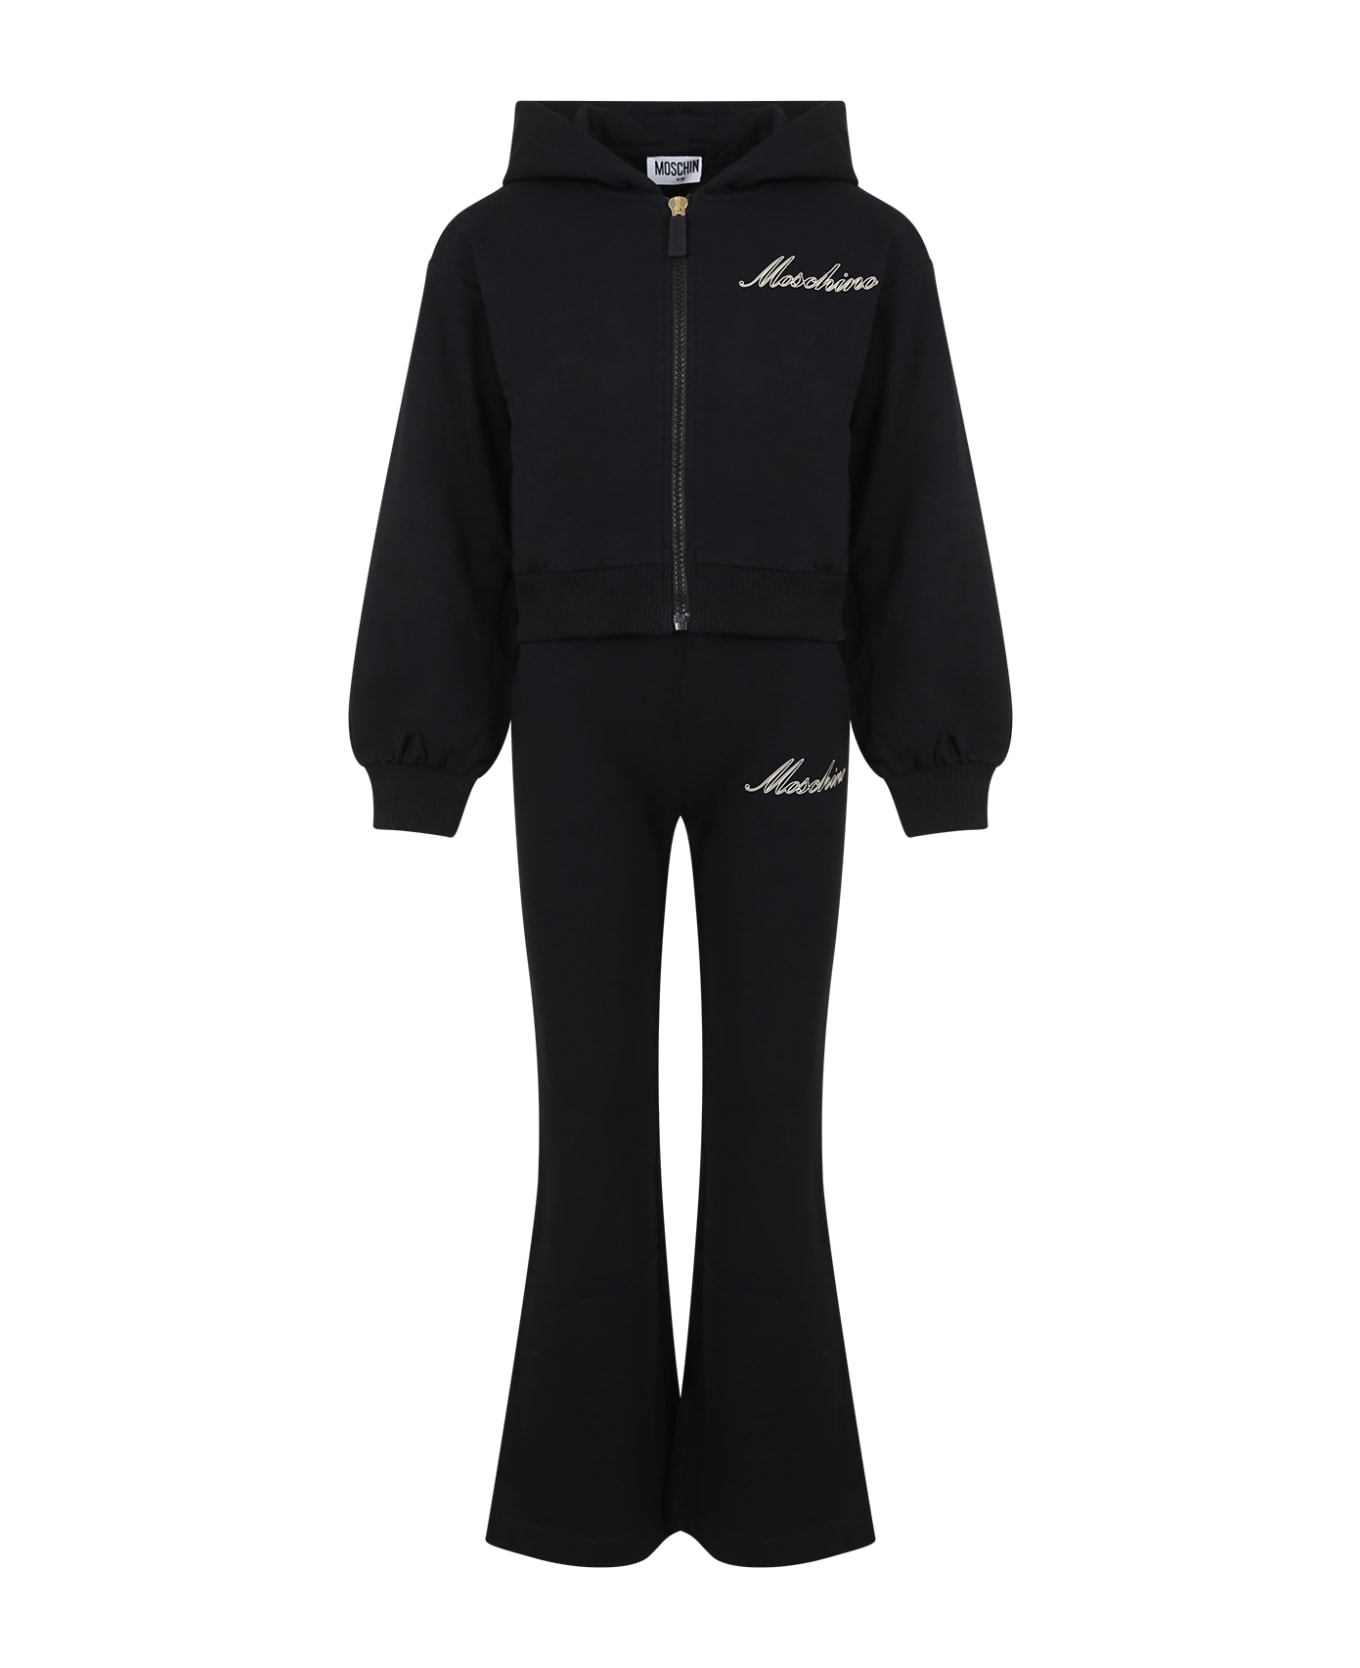 Moschino Black Tracksuit For Girls With Logo - Black